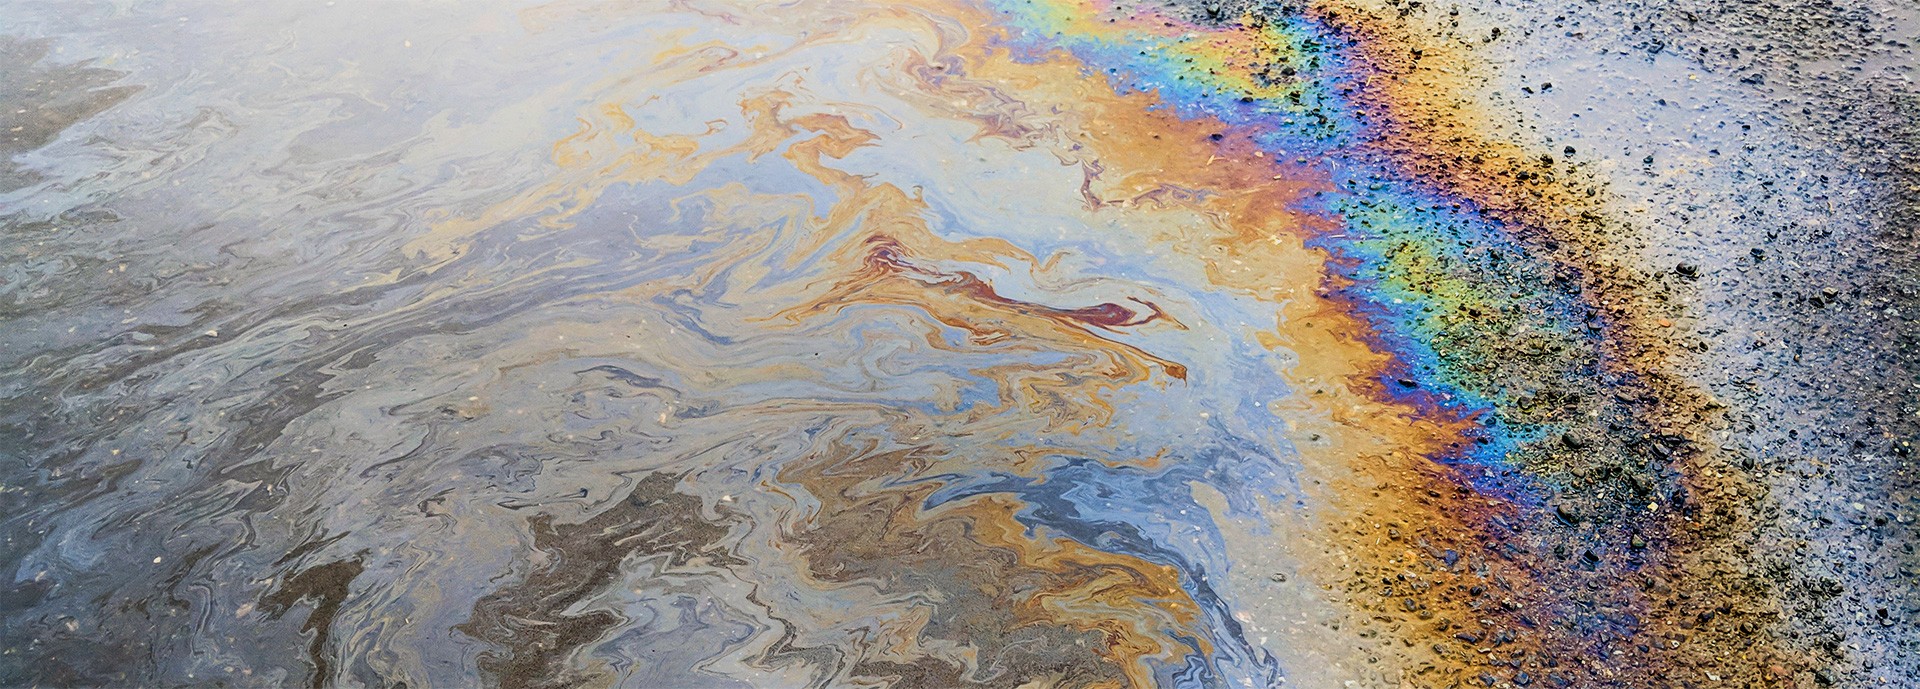 oil sheen on ground, with rainbow effect on right side